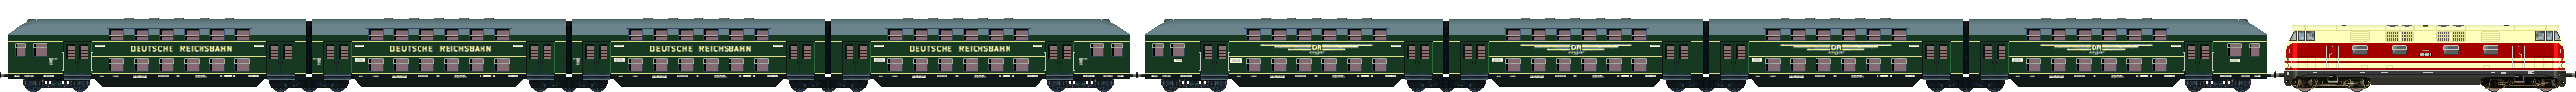 DR double decker jointed coaches DBv (former DB 13)